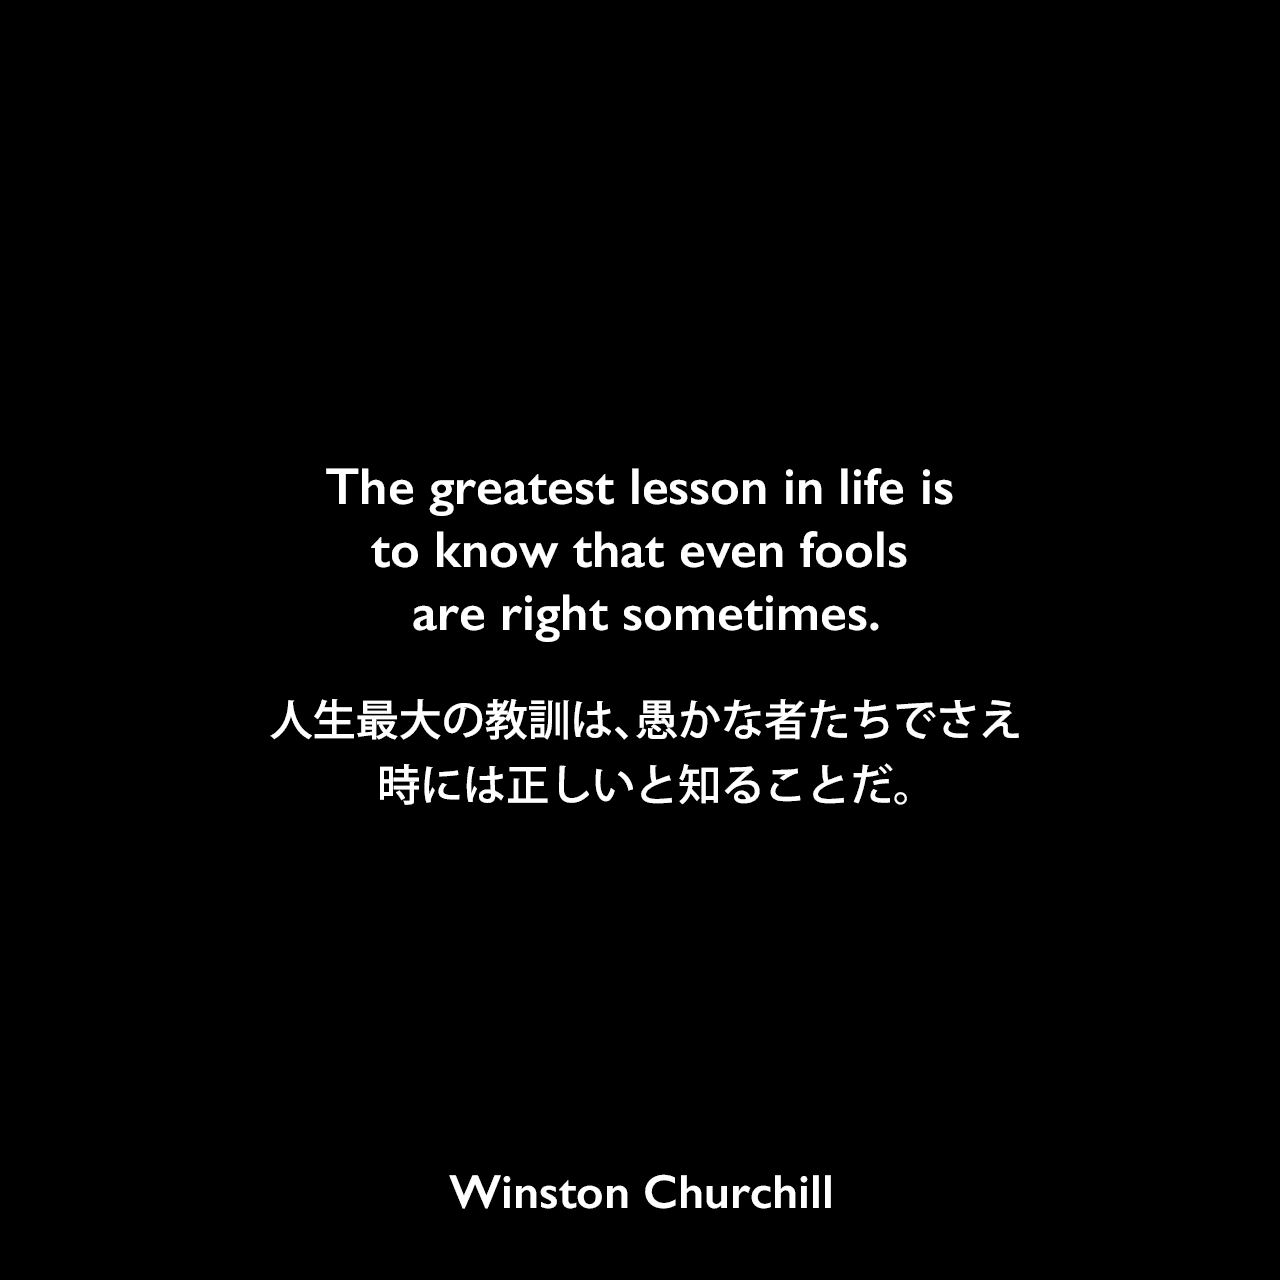 The greatest lesson in life is to know that even fools are right sometimes.人生最大の教訓は、愚かな者たちでさえ時には正しいと知ることだ。Winston Churchill